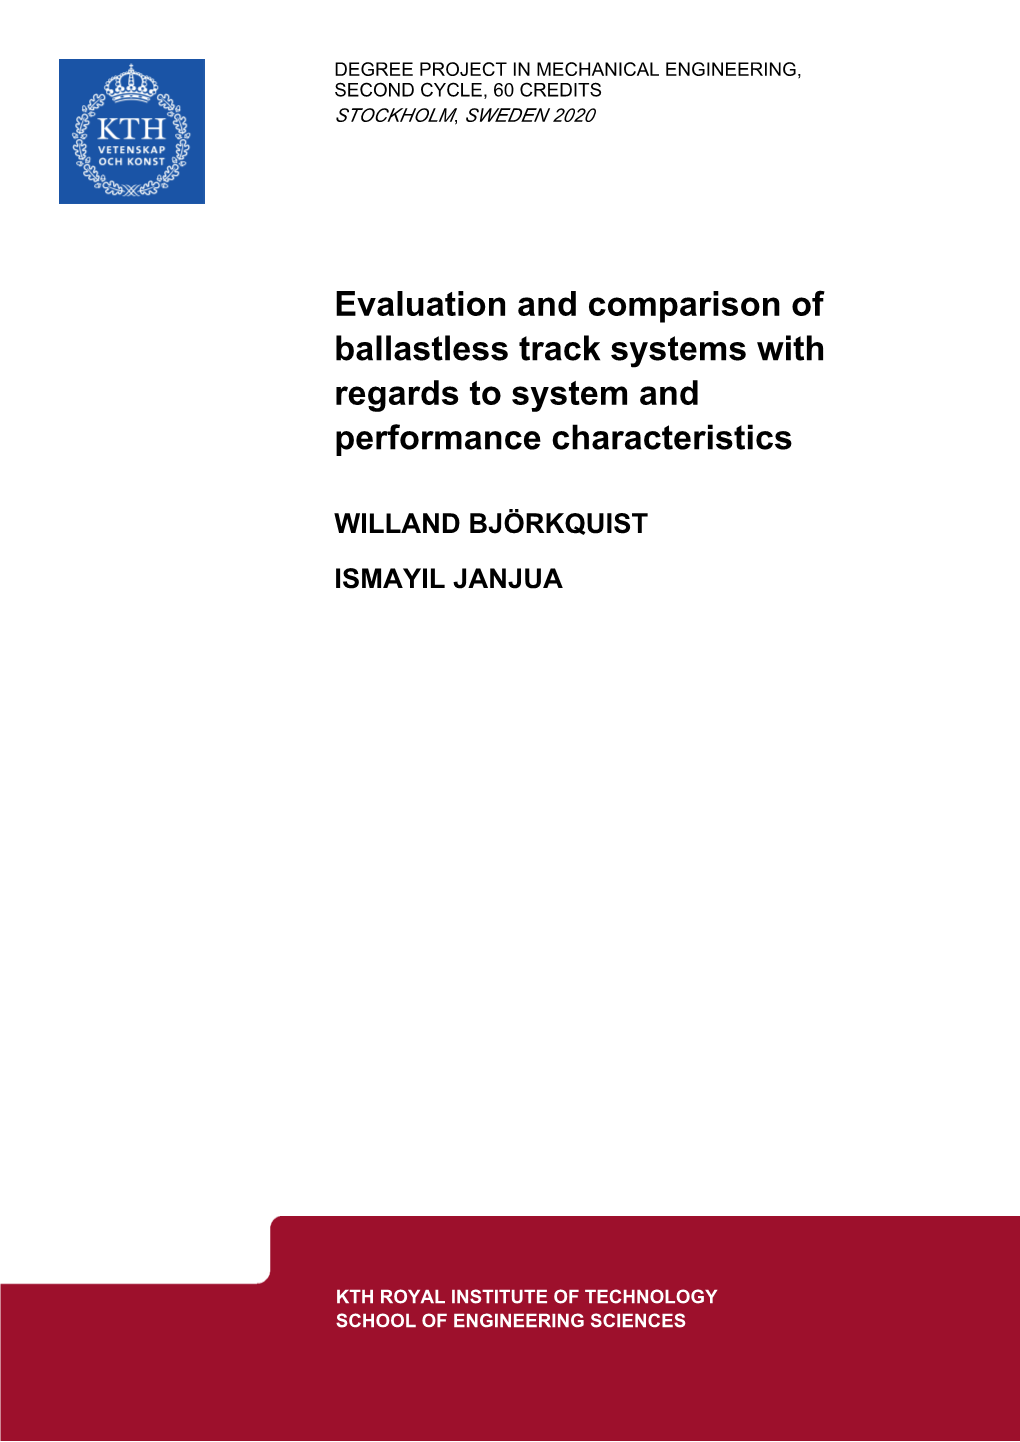 Evaluation and Comparison of Ballastless Track Systems with Regards to System and Performance Characteristics